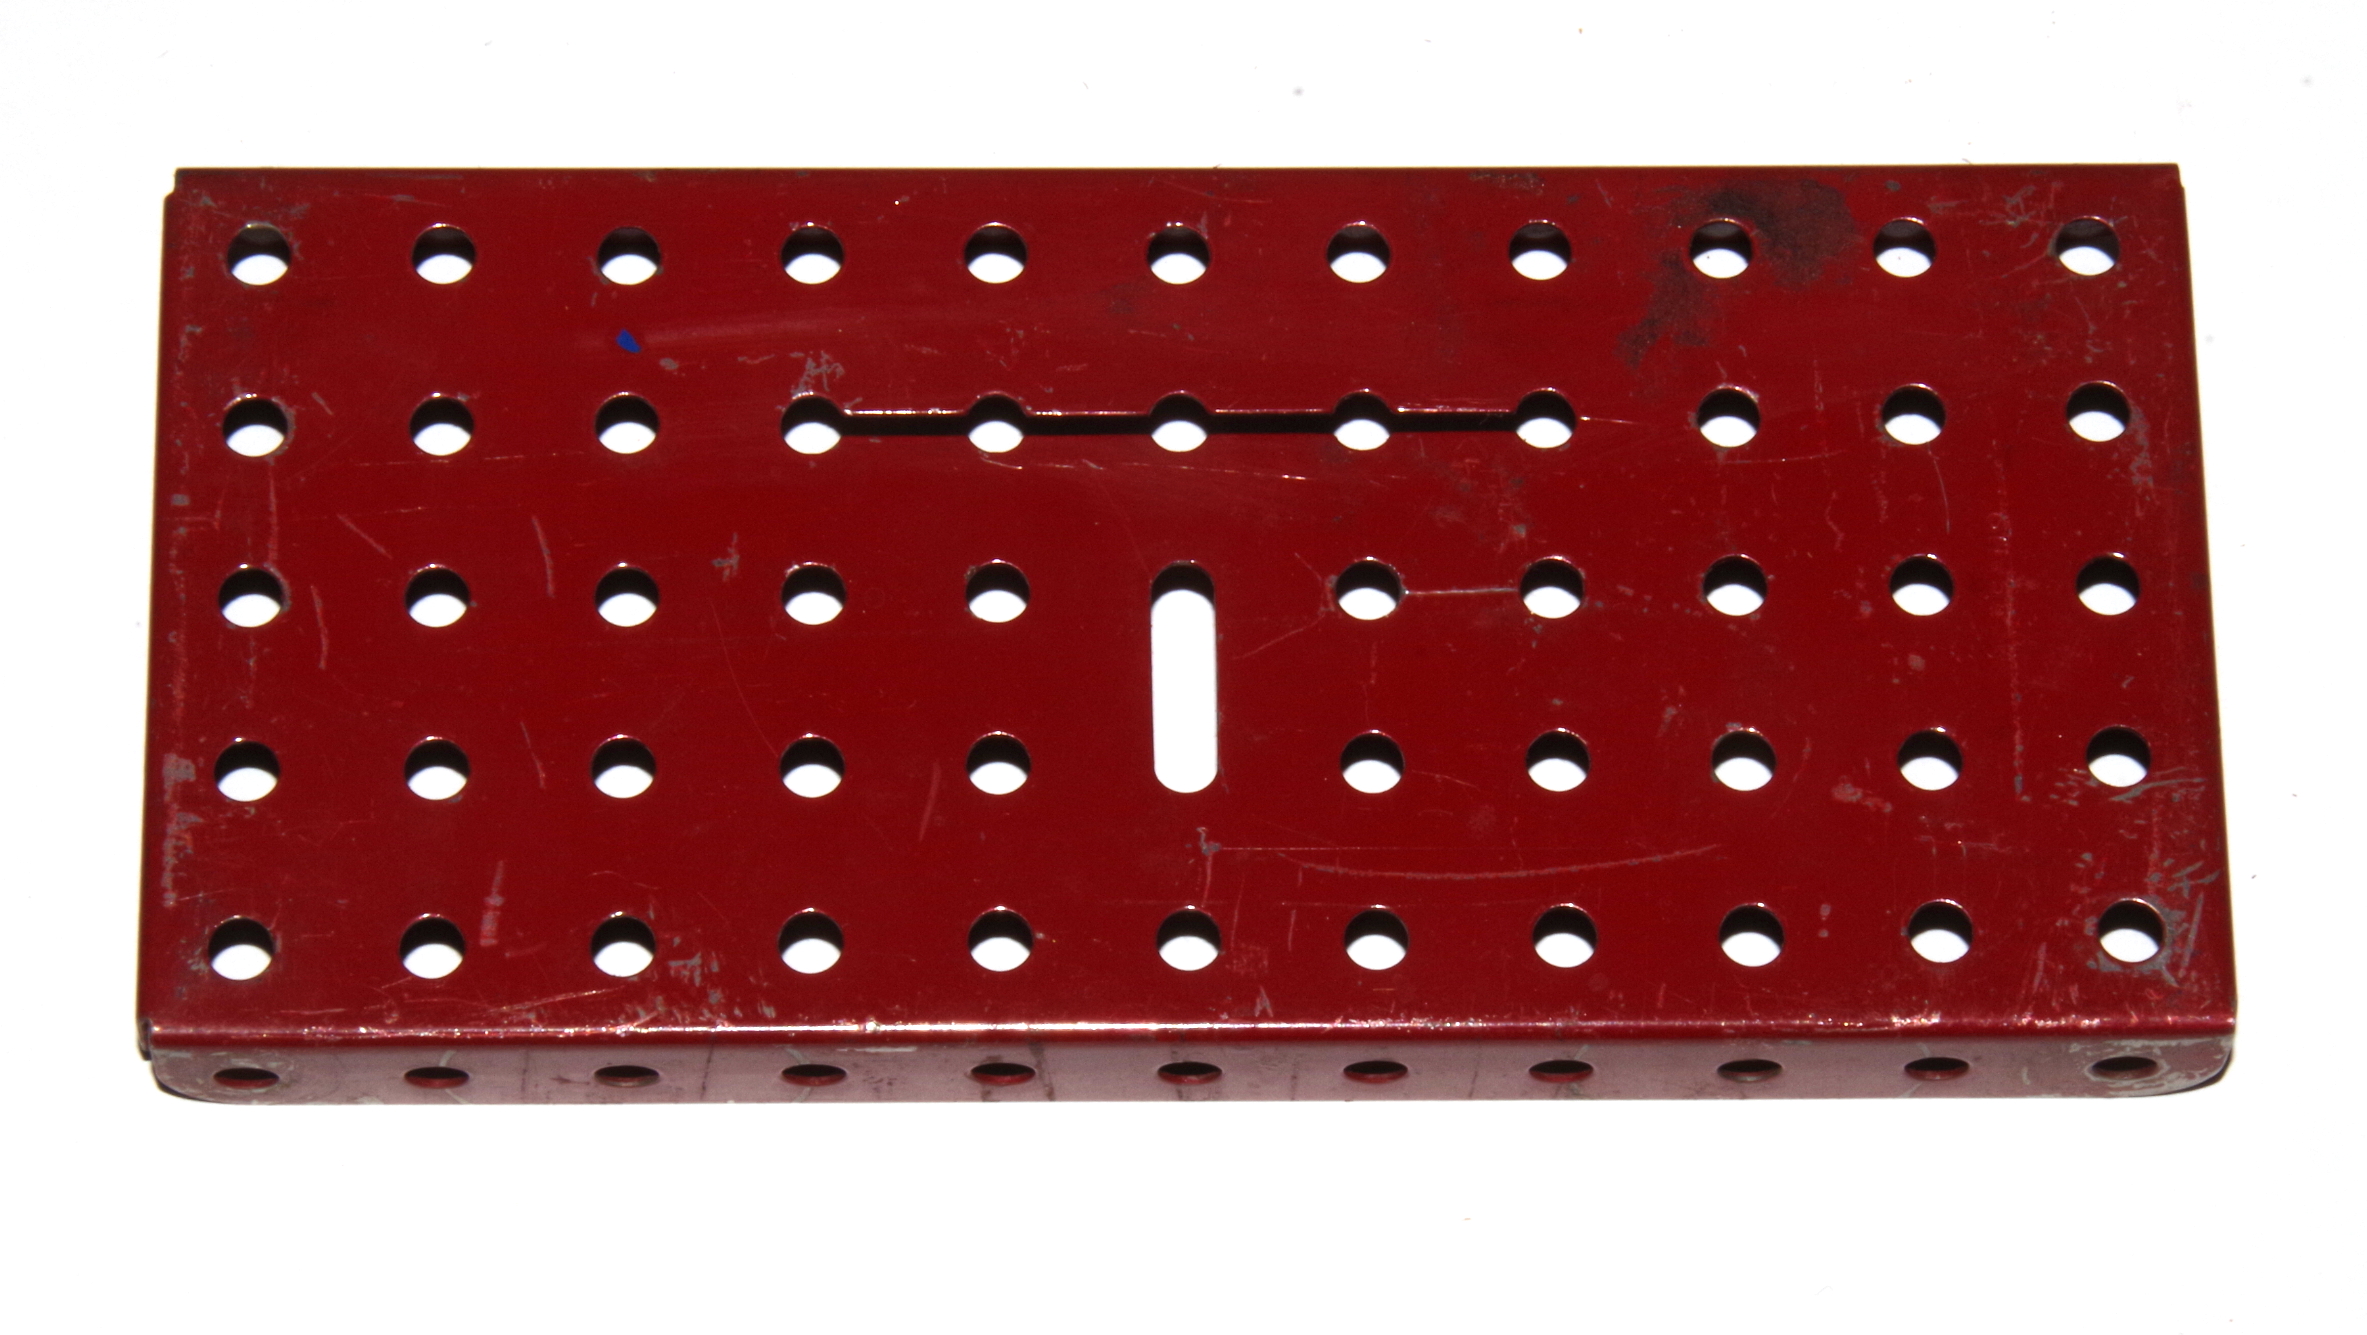 52x Flanged Plate 11x5 Hole Red Slotted Repainted